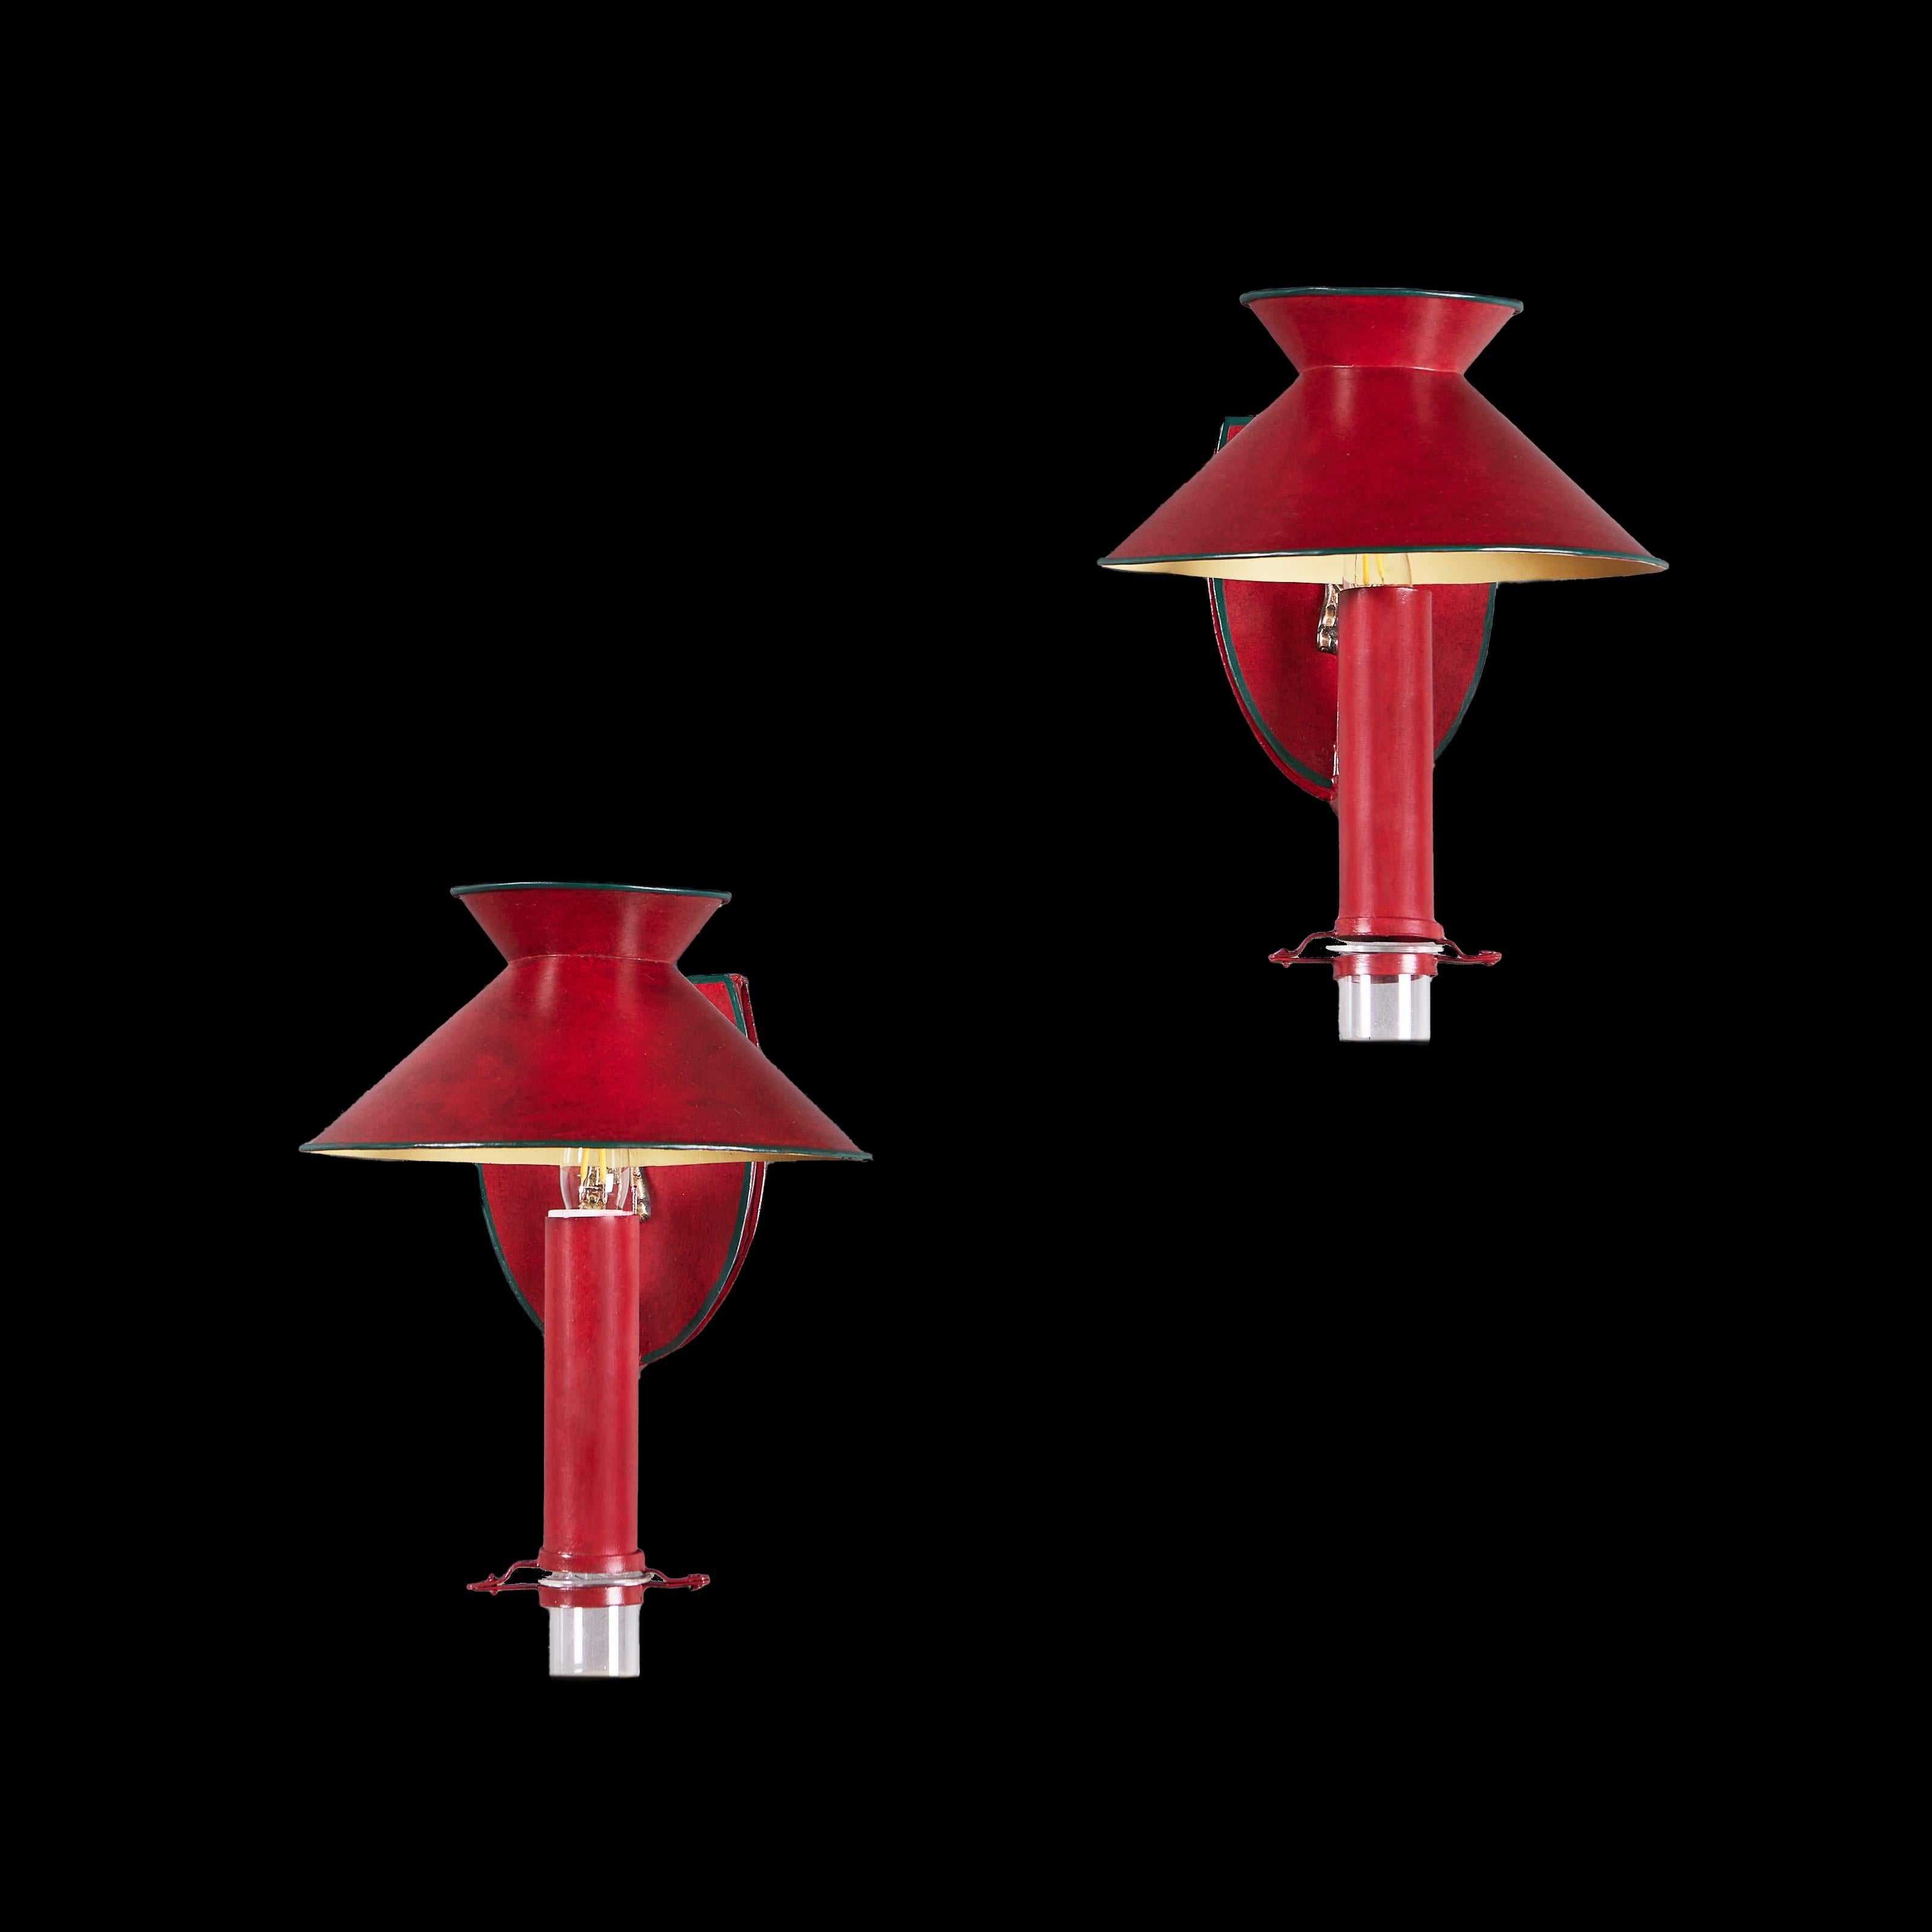 France, circa 1920

A pair of early twentieth century red tole wall lights of shield back design with brass anthemions, conical shaped shades and glass drip trays.

Height 26.00cm
Width 20.00cm
Depth 26.00cm

Please note: This is currently wired for